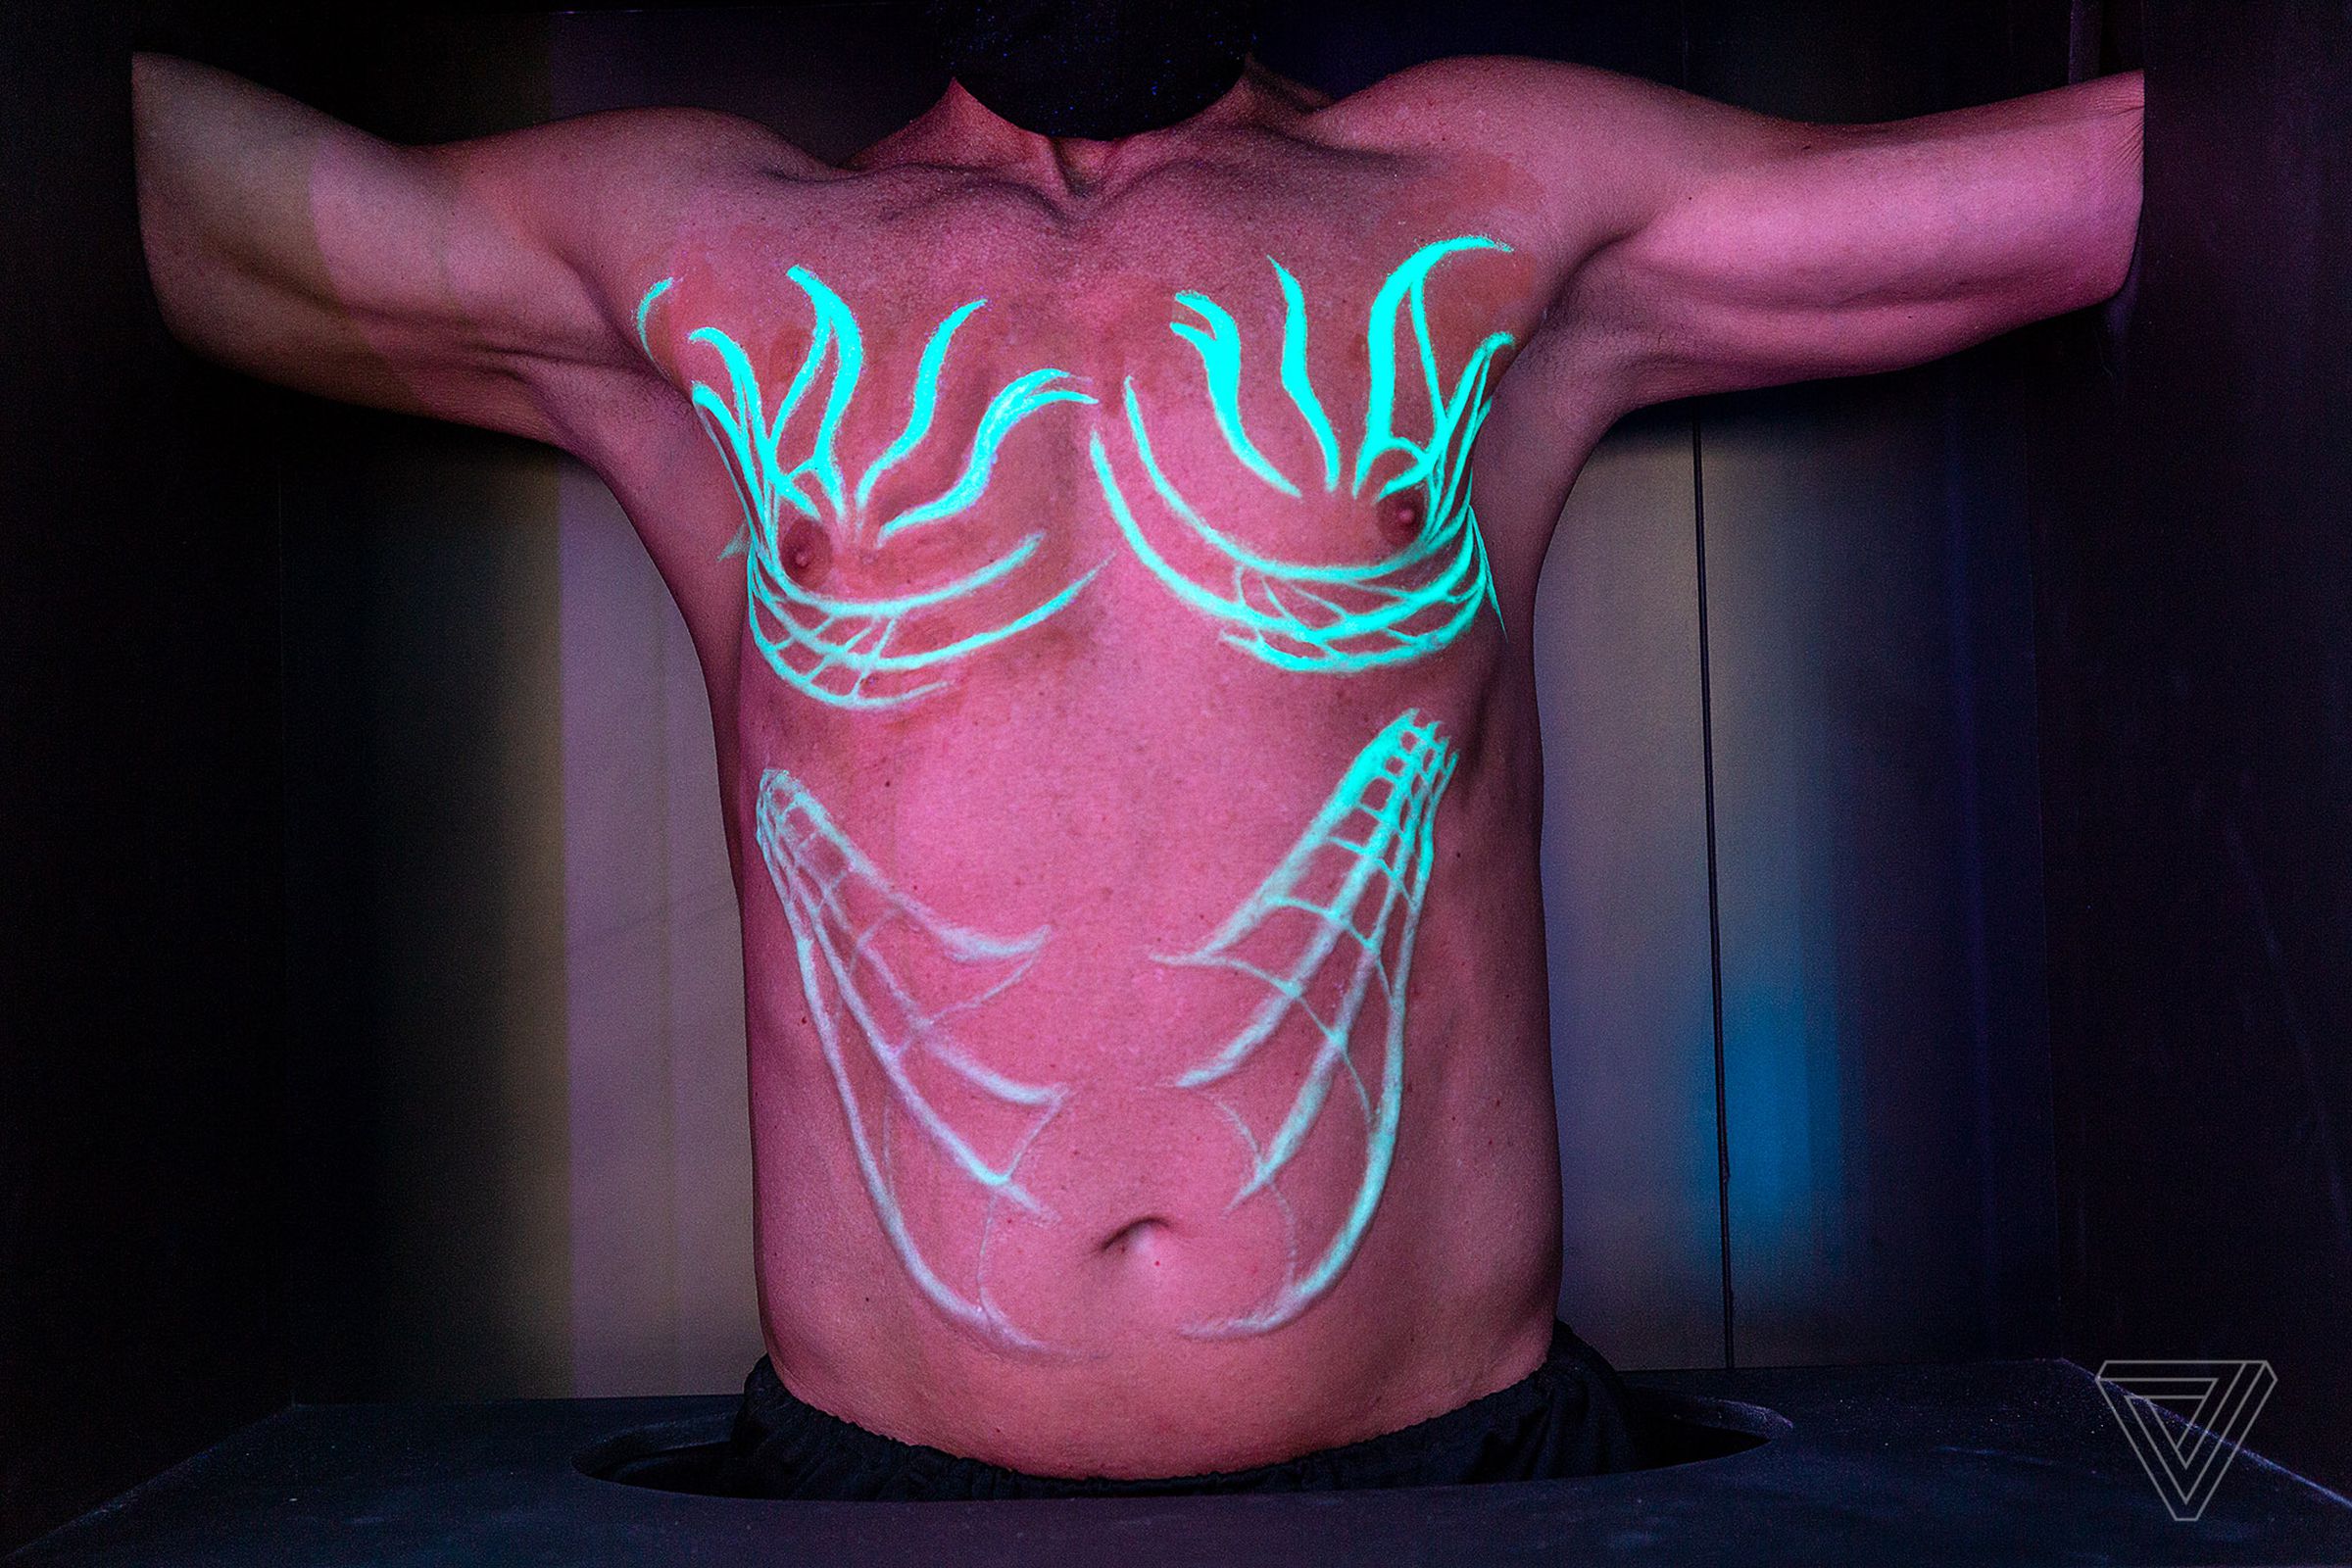 Carnaval, made up of “blacklight implants” is displayed on a live model at the A. Human exhibit.